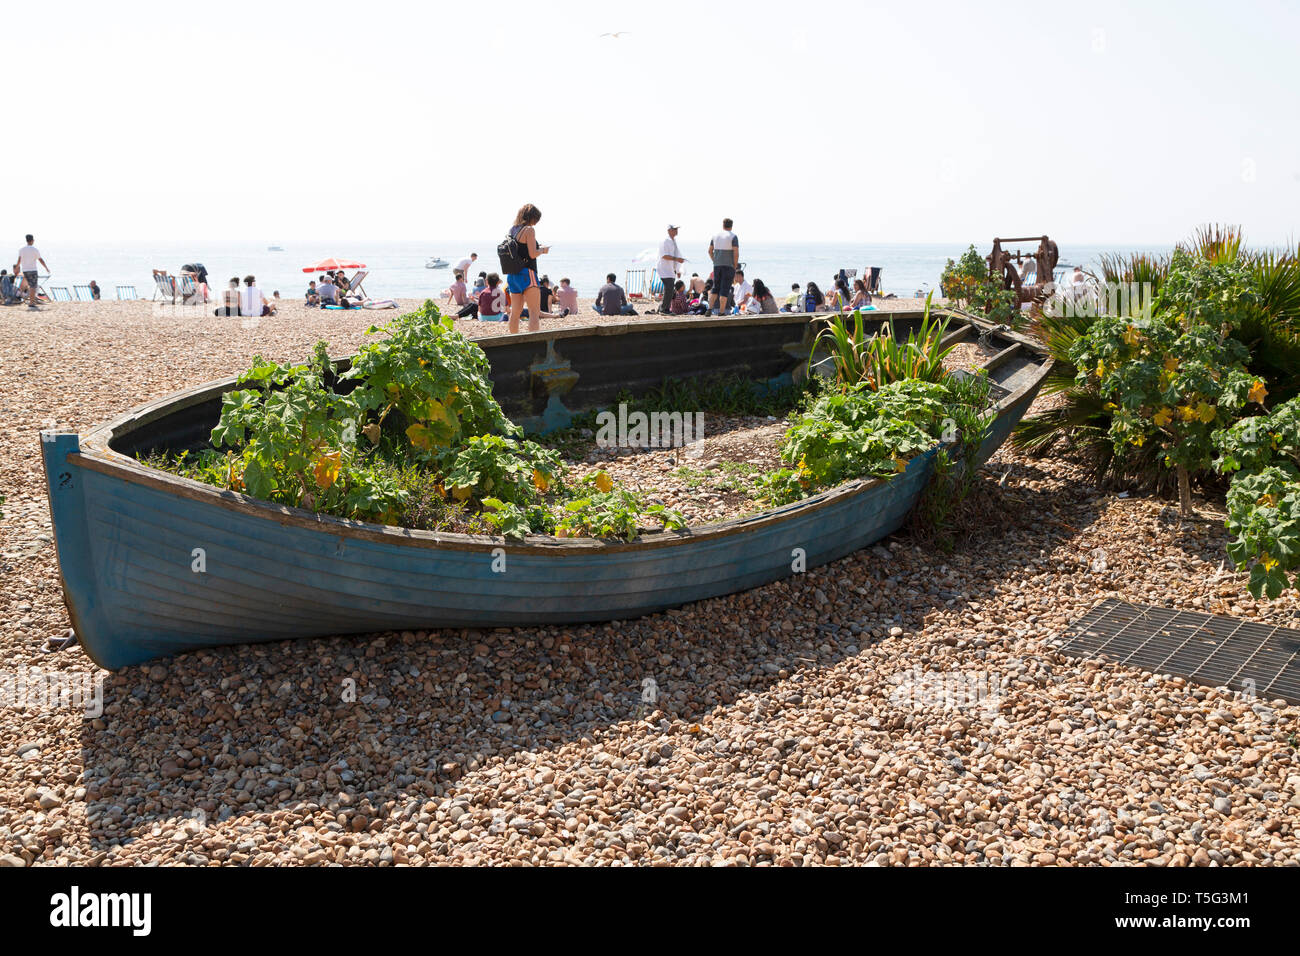 Wooden boat on the beach near Brighton Fishing Museum in East Sussex, England. Greenery is displayed in the boat. Stock Photo